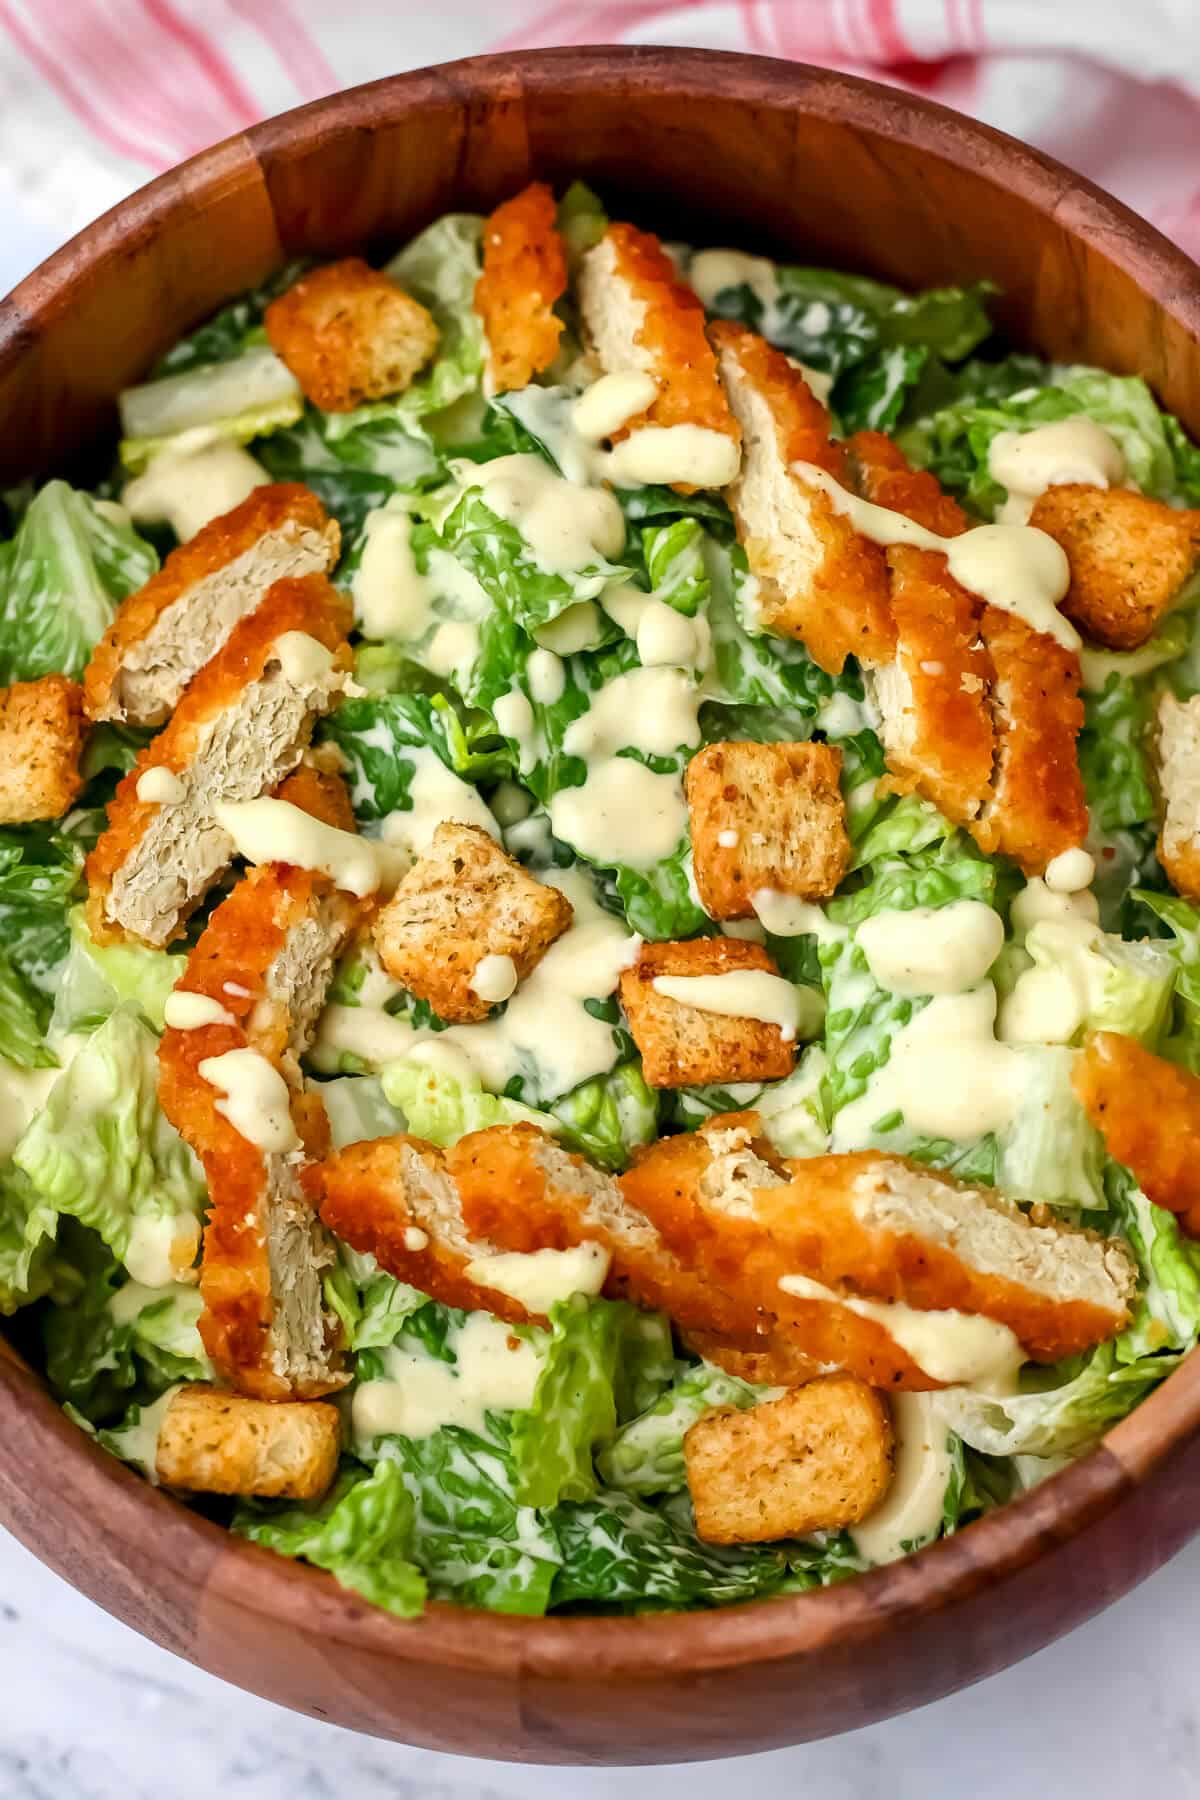 A top view of a wooden salad bowl filled with Romain lettuce with vegan Caesar dressing, vegan chicken, and croutons on it.